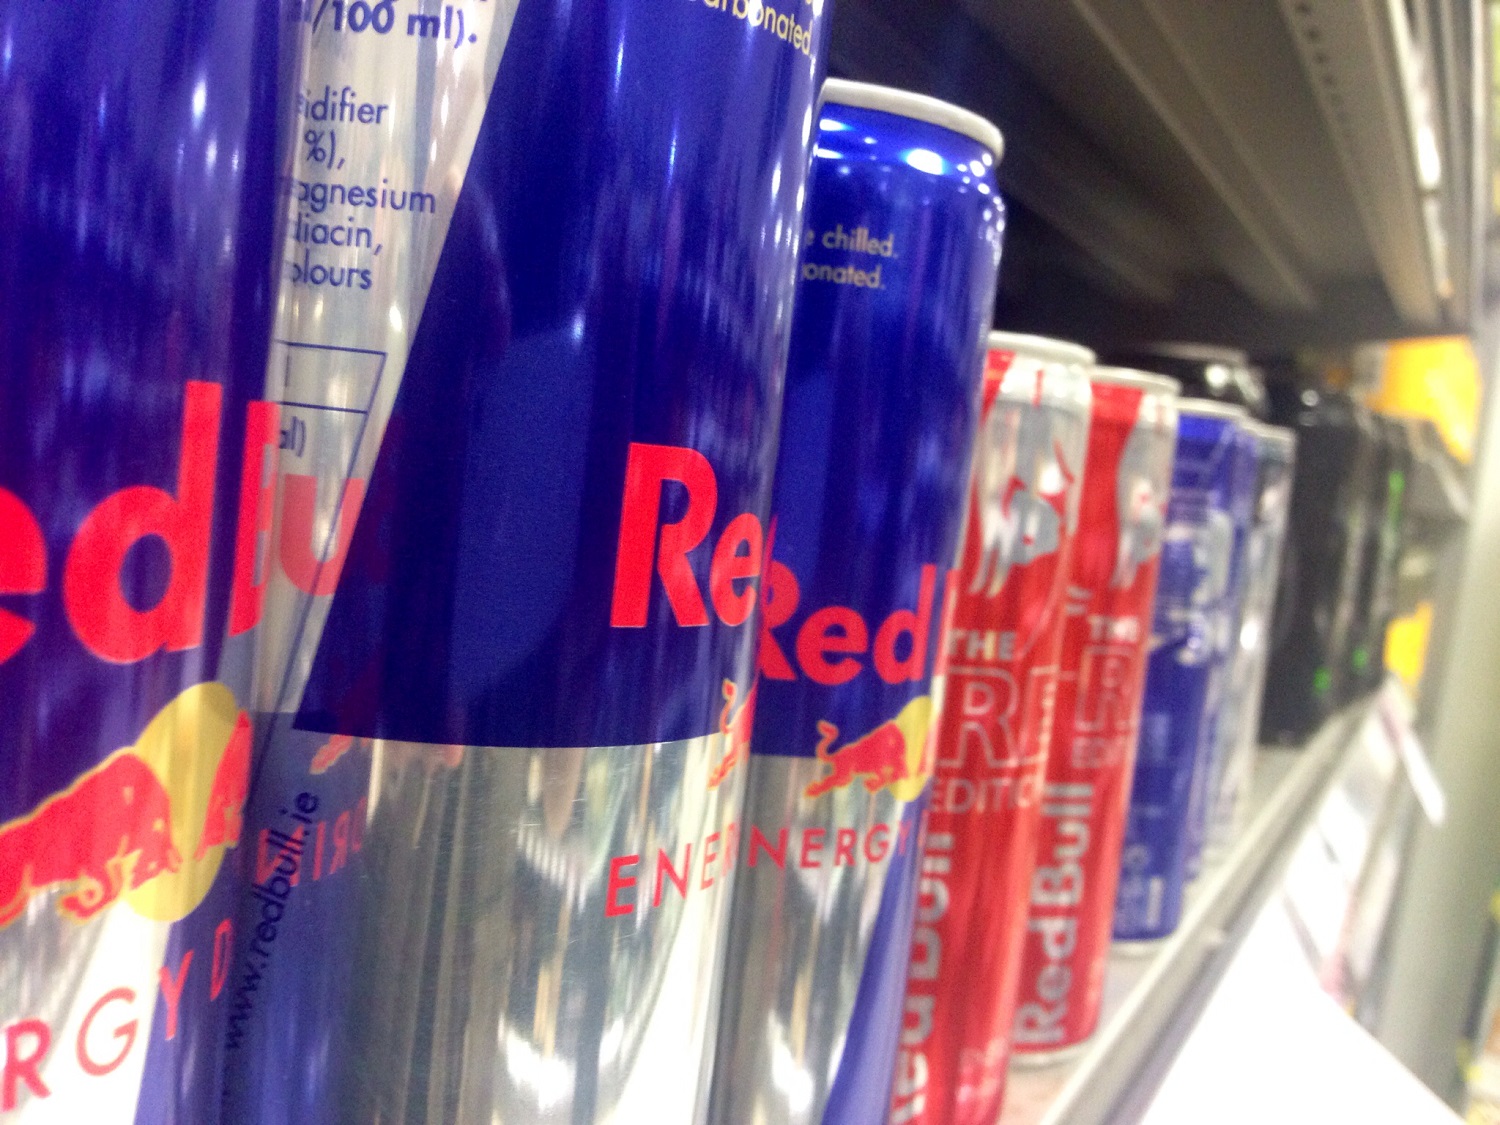 cans of red bull